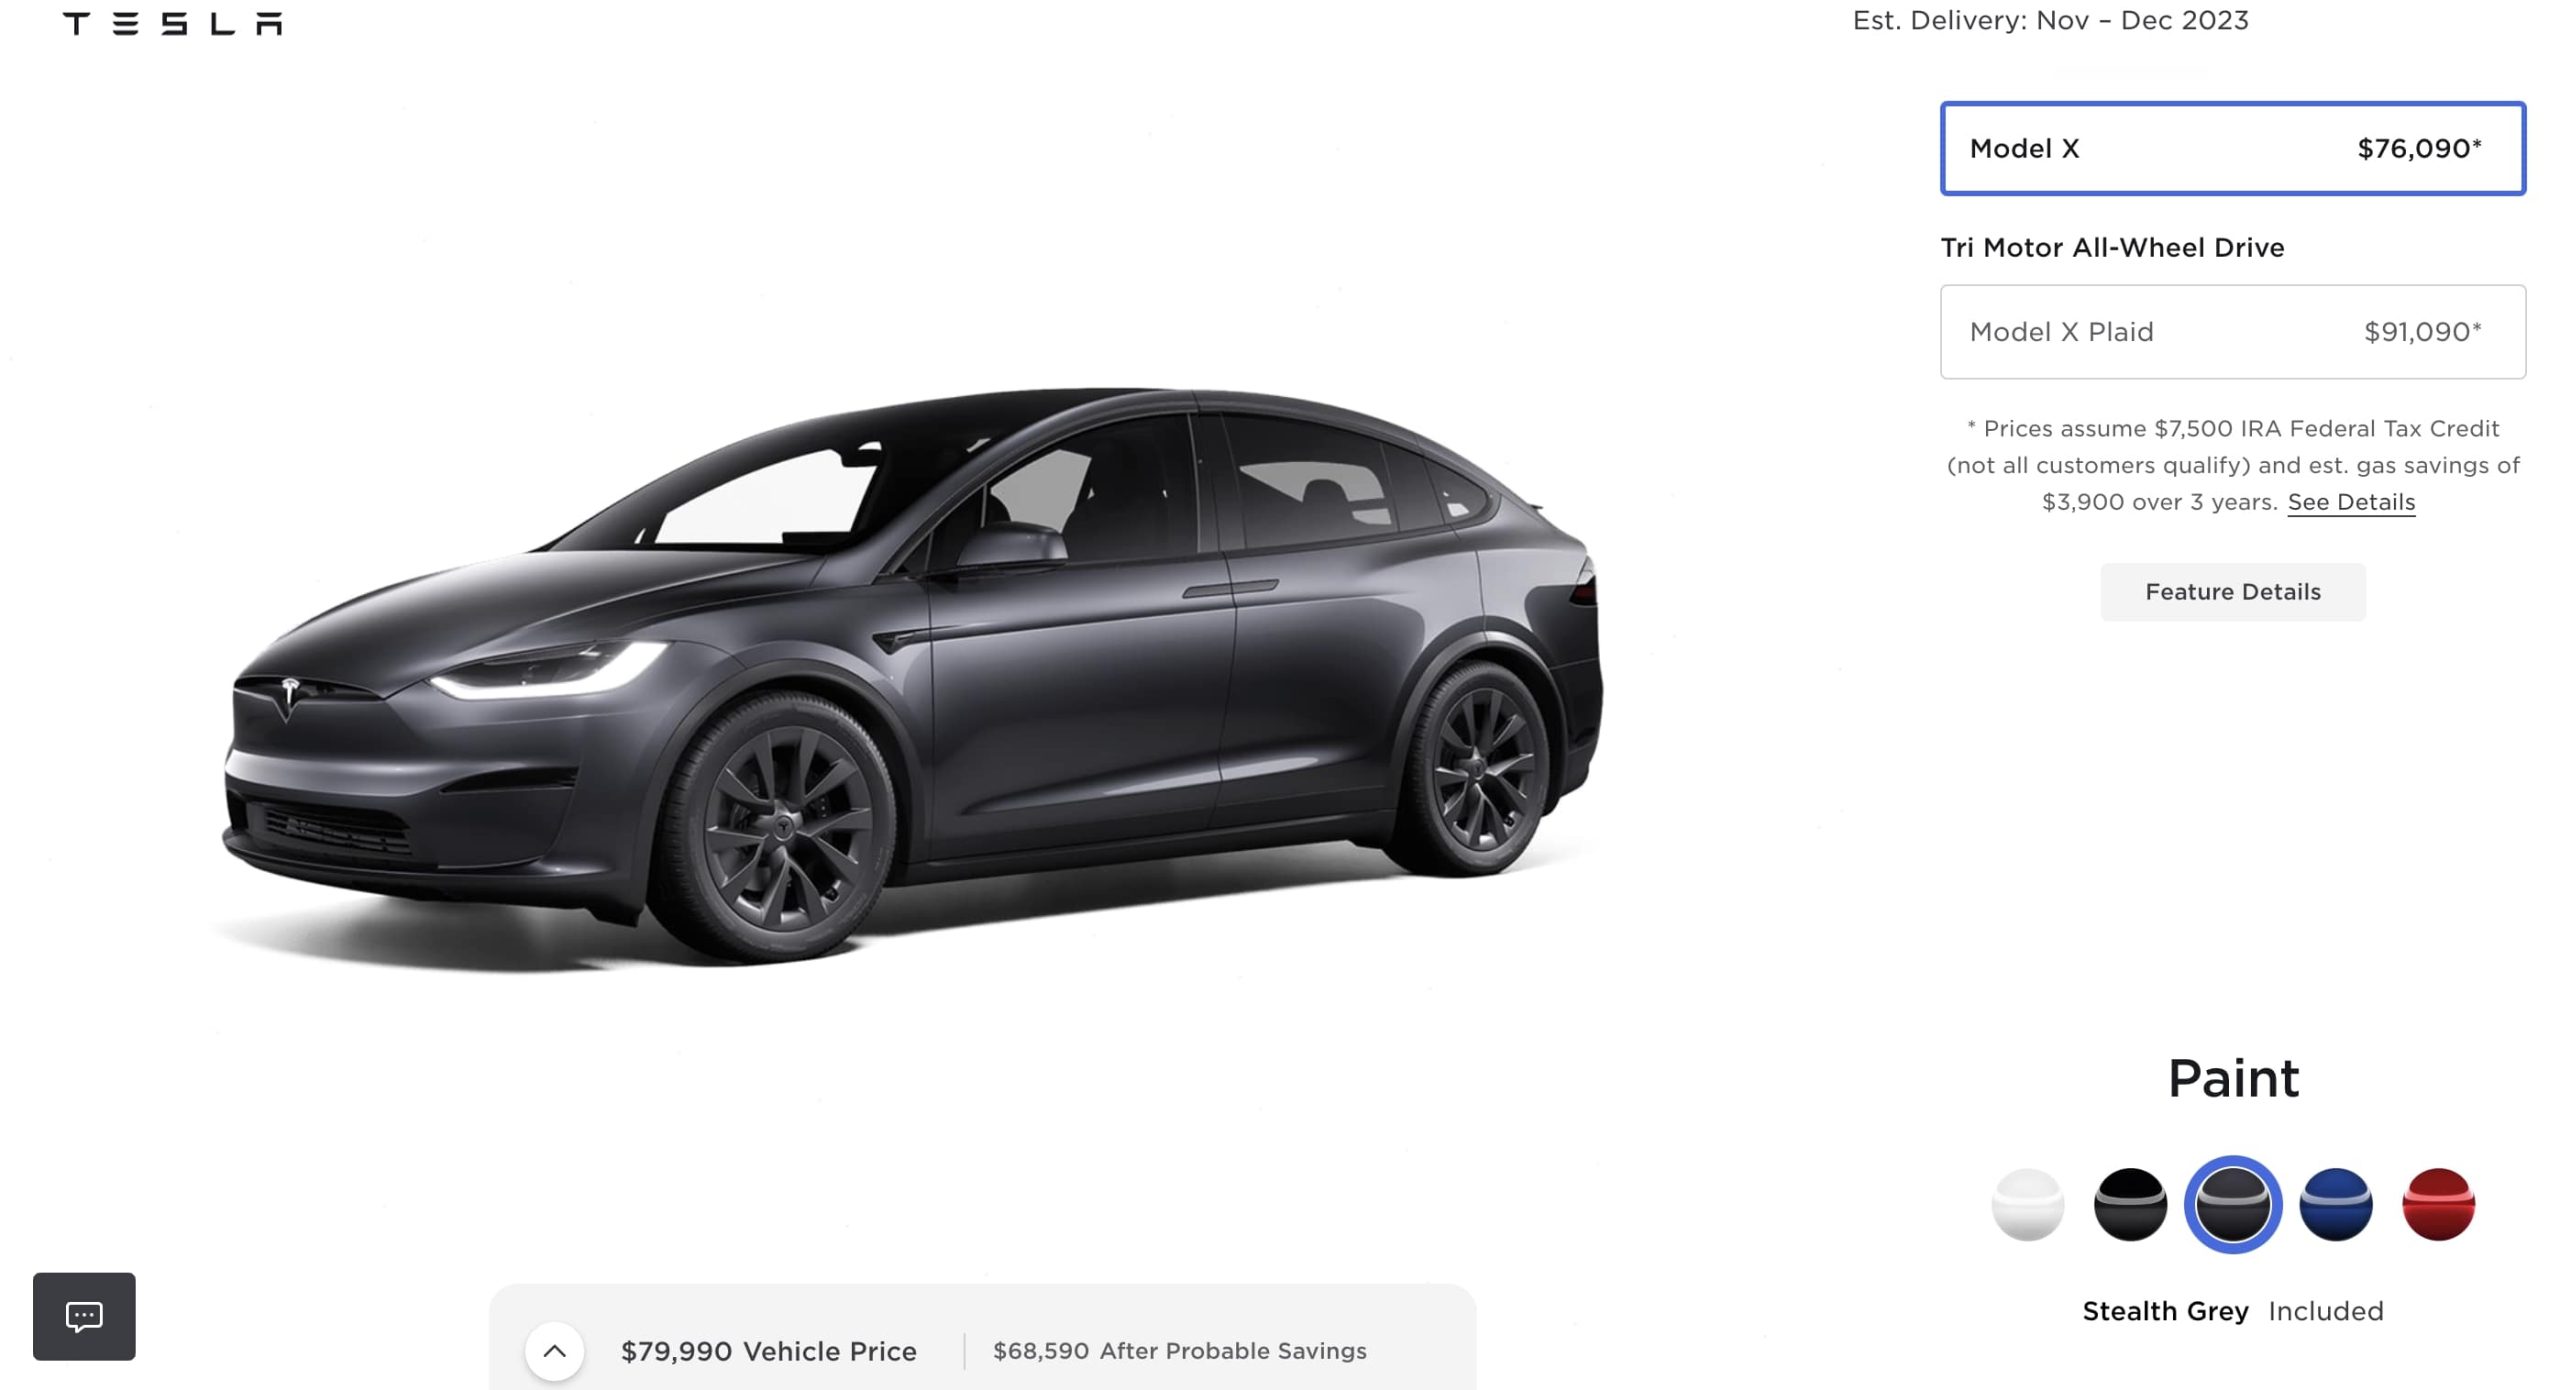 Tesla launches Stealth Grey for Model S and X